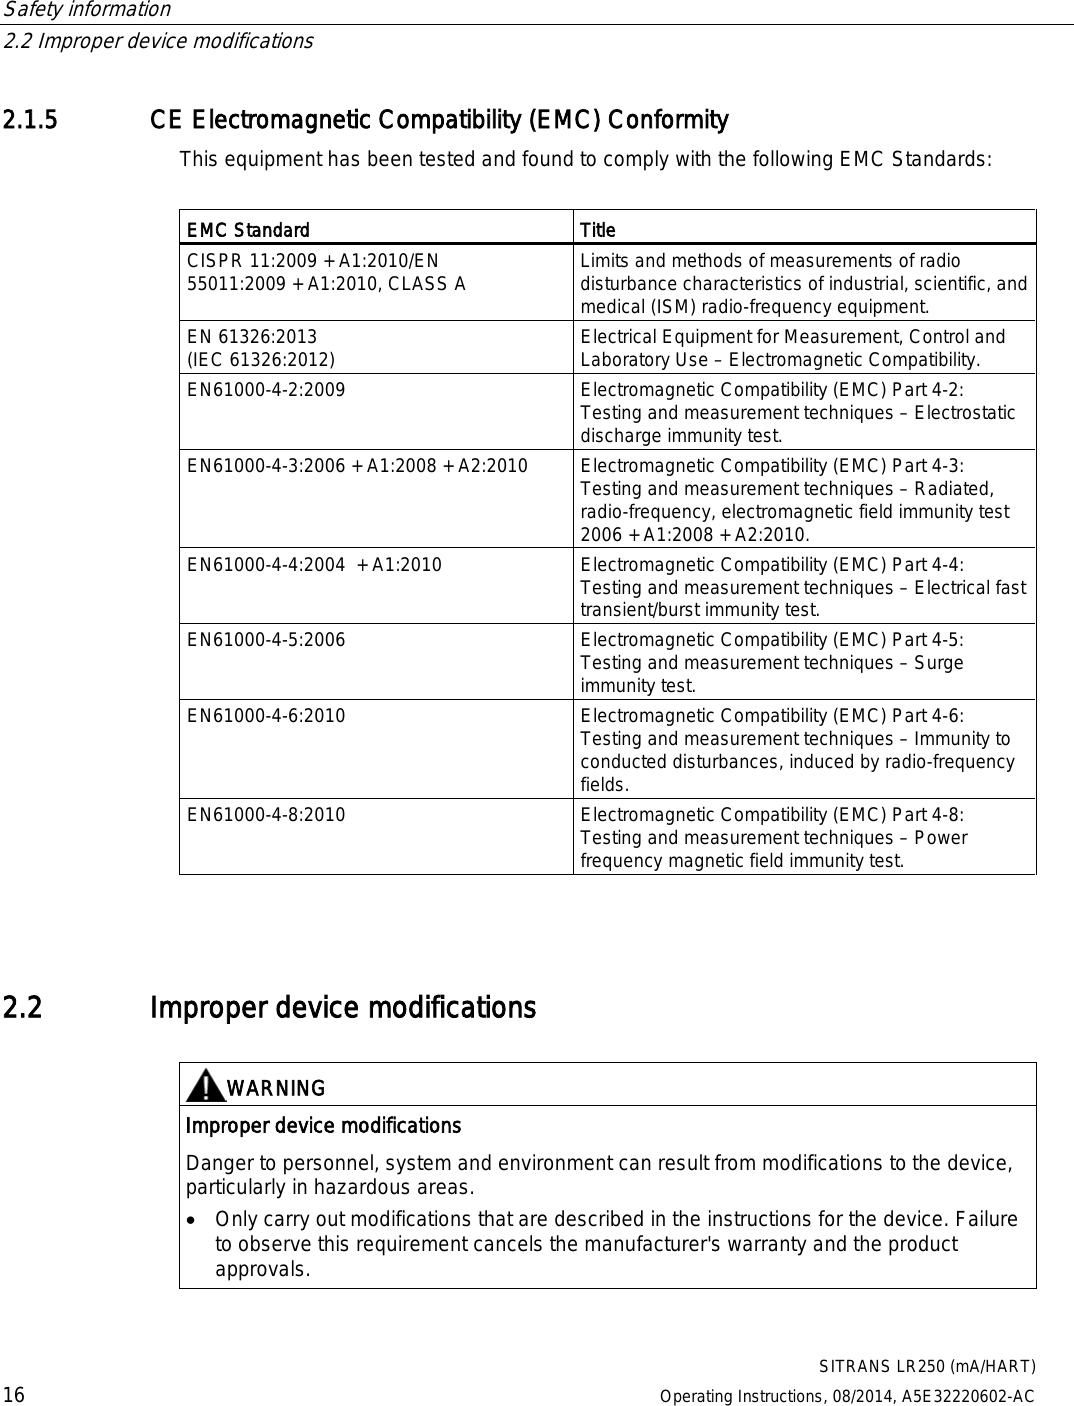 Safety information   2.2 Improper device modifications  SITRANS LR250 (mA/HART) 16 Operating Instructions, 08/2014, A5E32220602-AC 2.1.5 CE Electromagnetic Compatibility (EMC) Conformity This equipment has been tested and found to comply with the following EMC Standards:  EMC Standard Title CISPR 11:2009 + A1:2010/EN 55011:2009 + A1:2010, CLASS A Limits and methods of measurements of radio disturbance characteristics of industrial, scientific, and medical (ISM) radio-frequency equipment. EN 61326:2013 (IEC 61326:2012) Electrical Equipment for Measurement, Control and Laboratory Use – Electromagnetic Compatibility. EN61000-4-2:2009 Electromagnetic Compatibility (EMC) Part 4-2: Testing and measurement techniques – Electrostatic discharge immunity test. EN61000-4-3:2006 + A1:2008 + A2:2010 Electromagnetic Compatibility (EMC) Part 4-3: Testing and measurement techniques – Radiated, radio-frequency, electromagnetic field immunity test 2006 + A1:2008 + A2:2010. EN61000-4-4:2004  + A1:2010 Electromagnetic Compatibility (EMC) Part 4-4: Testing and measurement techniques – Electrical fast transient/burst immunity test. EN61000-4-5:2006 Electromagnetic Compatibility (EMC) Part 4-5: Testing and measurement techniques – Surge immunity test. EN61000-4-6:2010 Electromagnetic Compatibility (EMC) Part 4-6: Testing and measurement techniques – Immunity to conducted disturbances, induced by radio-frequency fields. EN61000-4-8:2010  Electromagnetic Compatibility (EMC) Part 4-8: Testing and measurement techniques – Power frequency magnetic field immunity test.   2.2 Improper device modifications   WARNING Improper device modifications    Danger to personnel, system and environment can result from modifications to the device, particularly in hazardous areas. • Only carry out modifications that are described in the instructions for the device. Failure to observe this requirement cancels the manufacturer&apos;s warranty and the product approvals.  